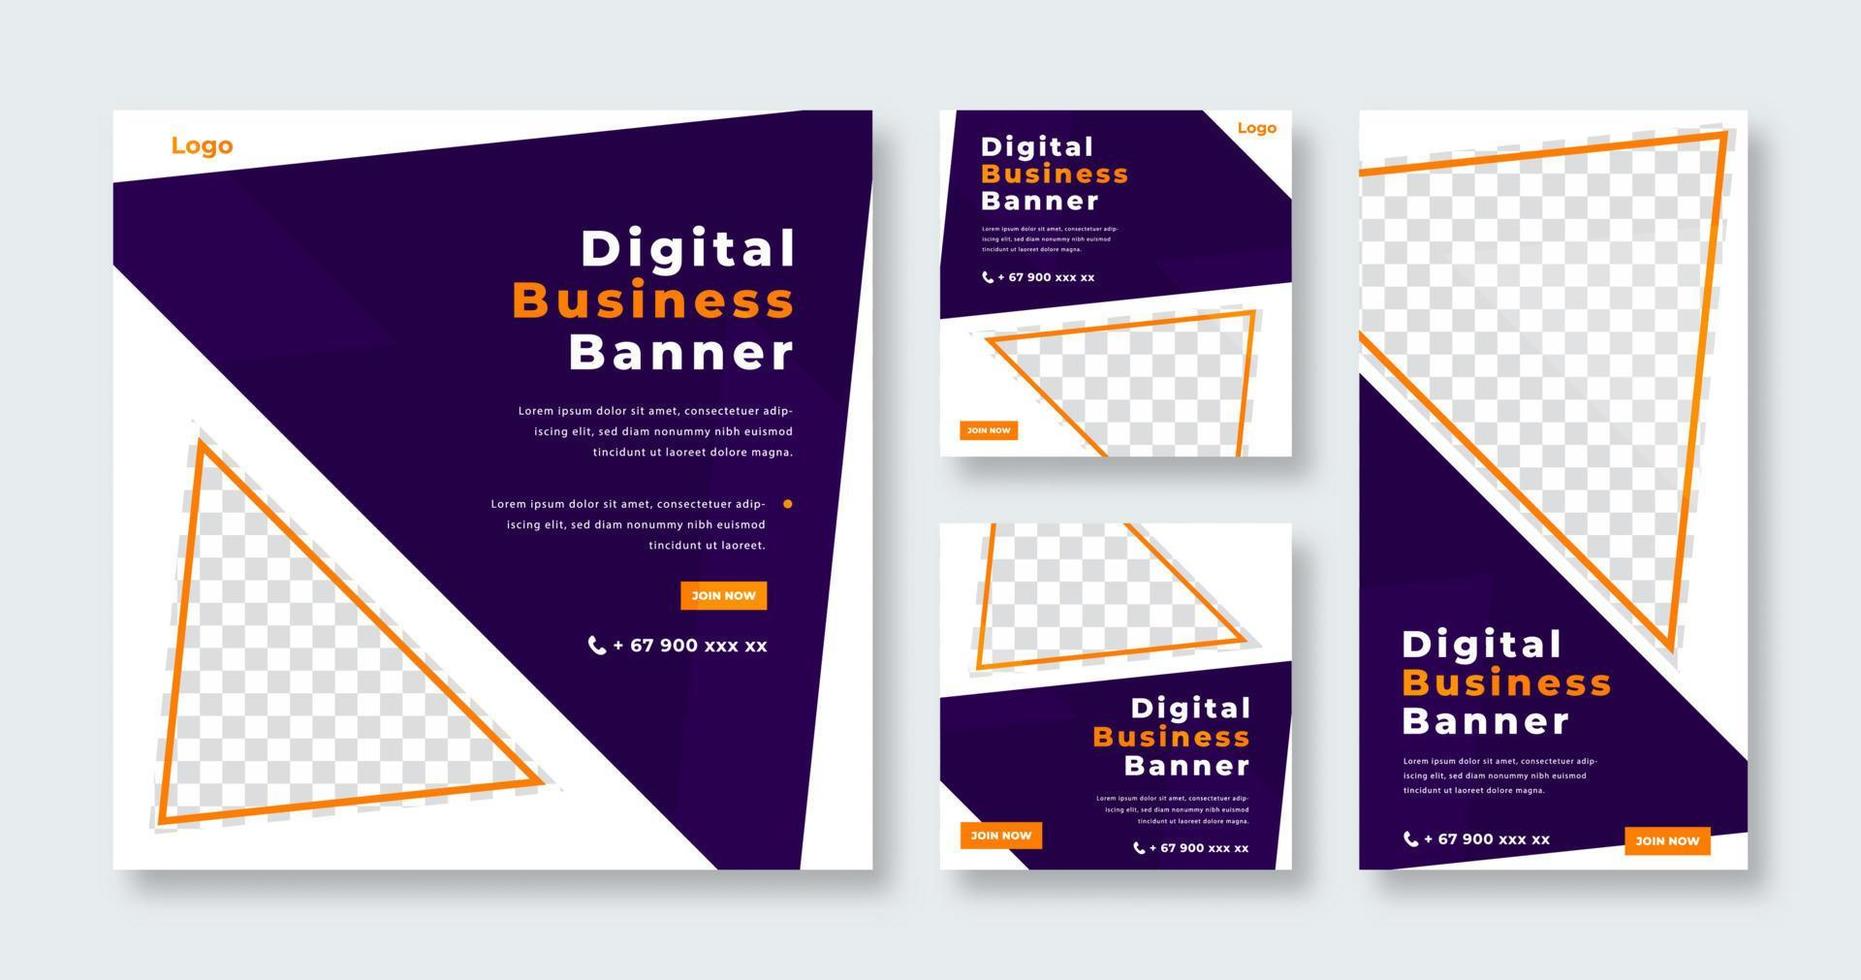 Digital Business Banner for Social Media Post, Mobile App, Banners, Promotinal and Presentation Flyer Template vector